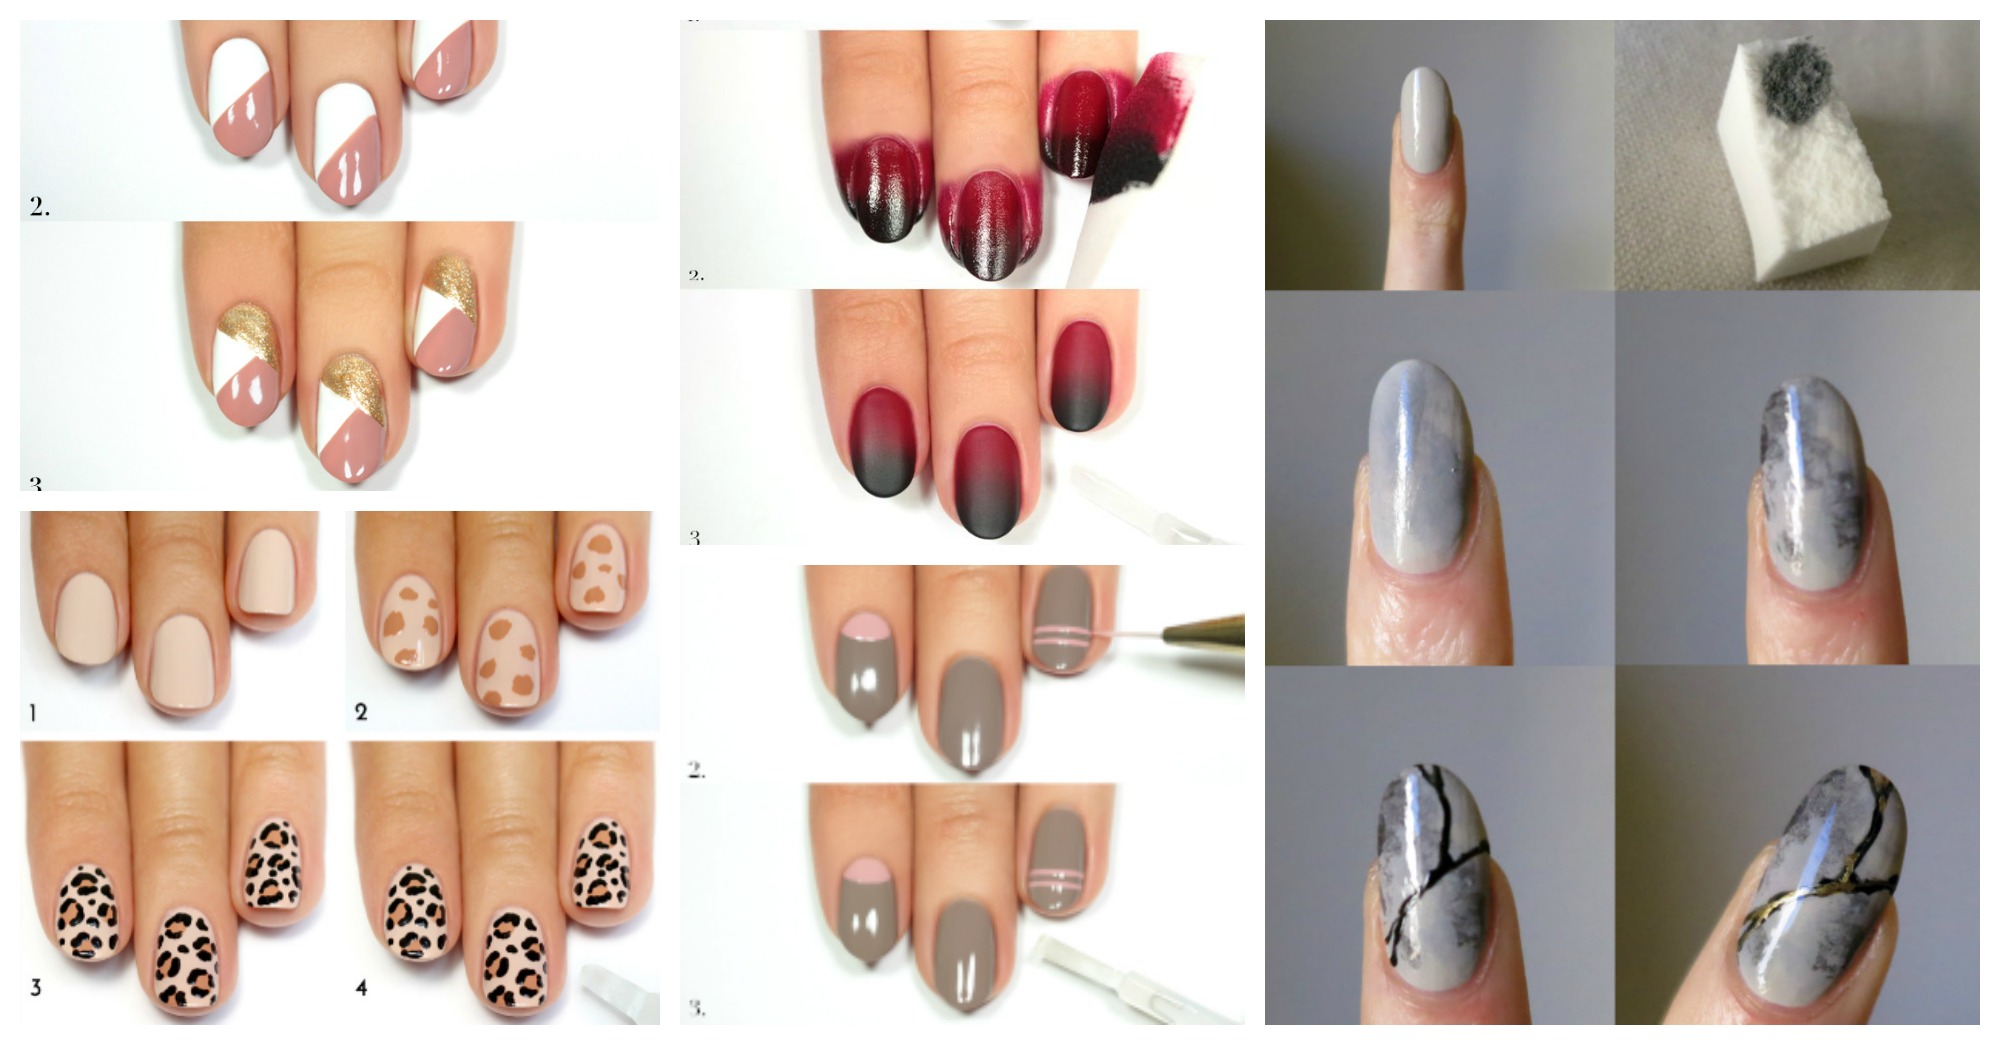 5. Step-by-Step Nail Design Tutorials for At-Home Manicures - wide 2